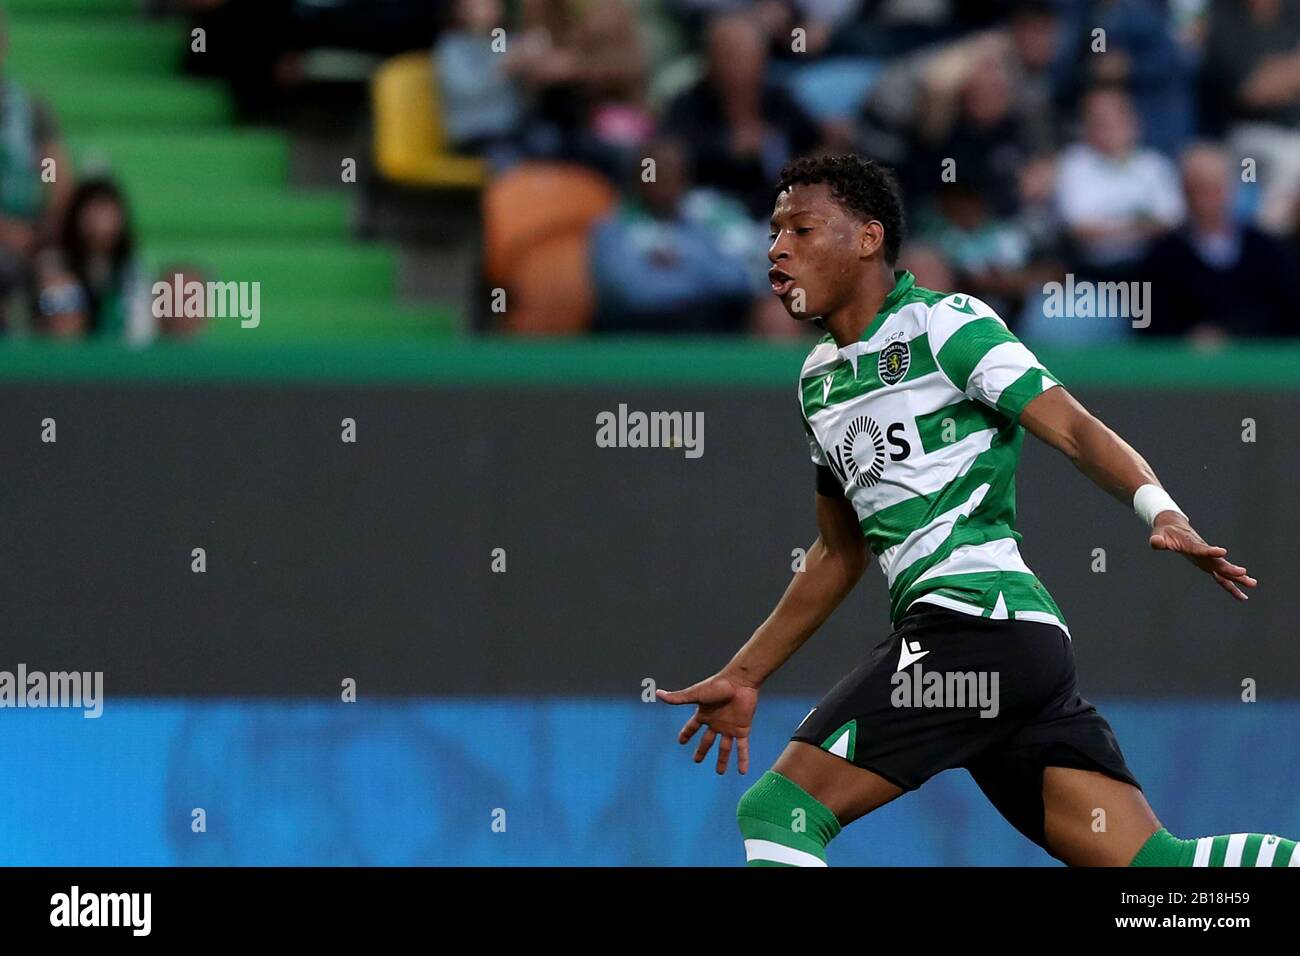 Lisbon, Portugal. 23rd Feb, 2020. Gonzalo Plata of Sporting CP celebrates during the Primeira Liga football match between Sporting CP and Boavista FC in Lisbon, Portugal, on Feb. 23, 2020. Credit: Pedro Fiuza/Xinhua/Alamy Live News Stock Photo